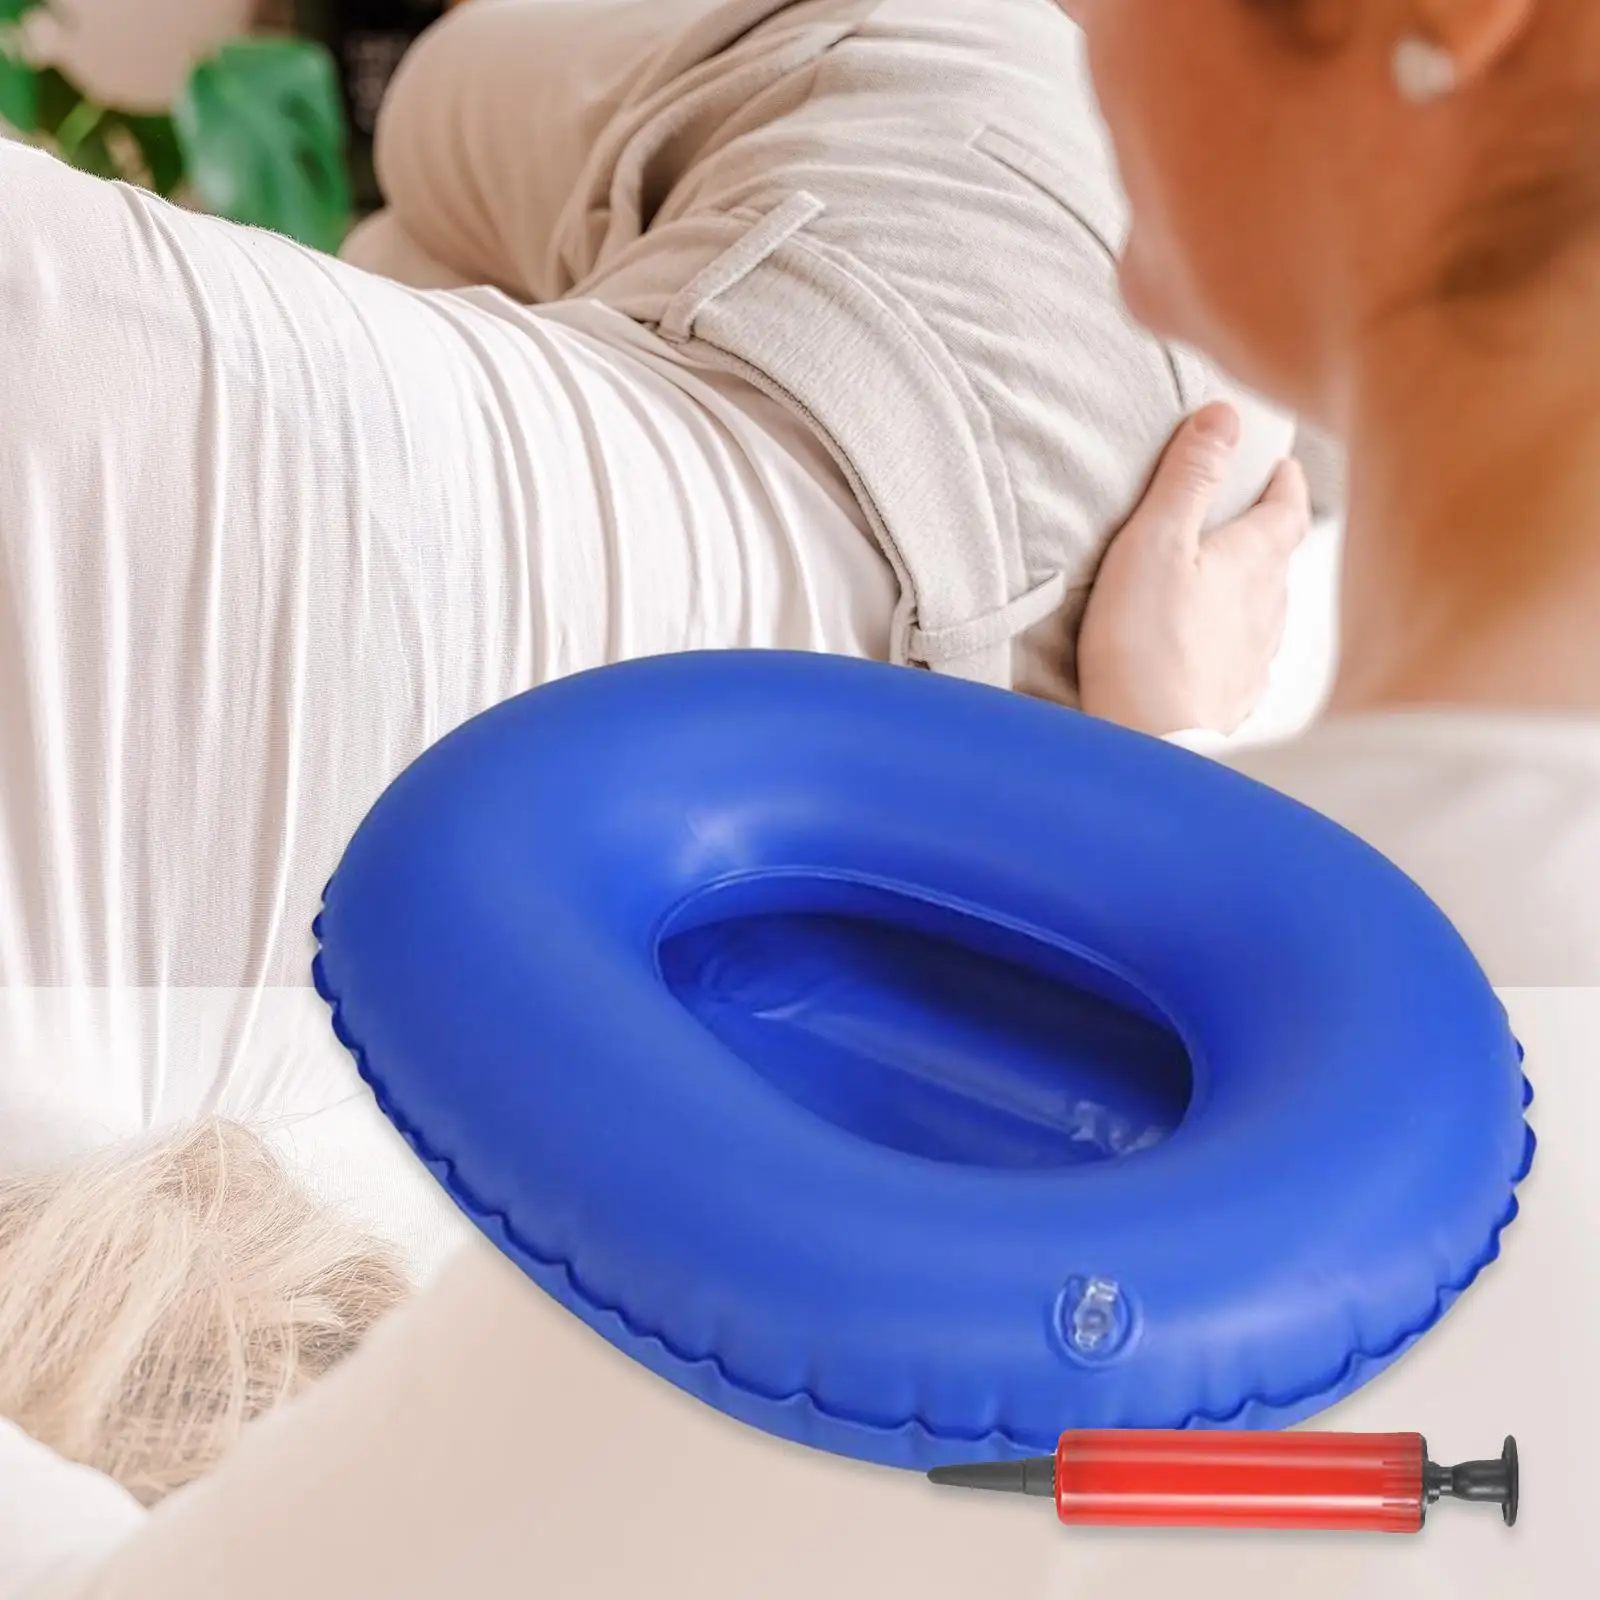 Inflatable Bedpans For Elderly Easy To Clean Soft Seat Stool For Bedridden Elderly Home Disabled